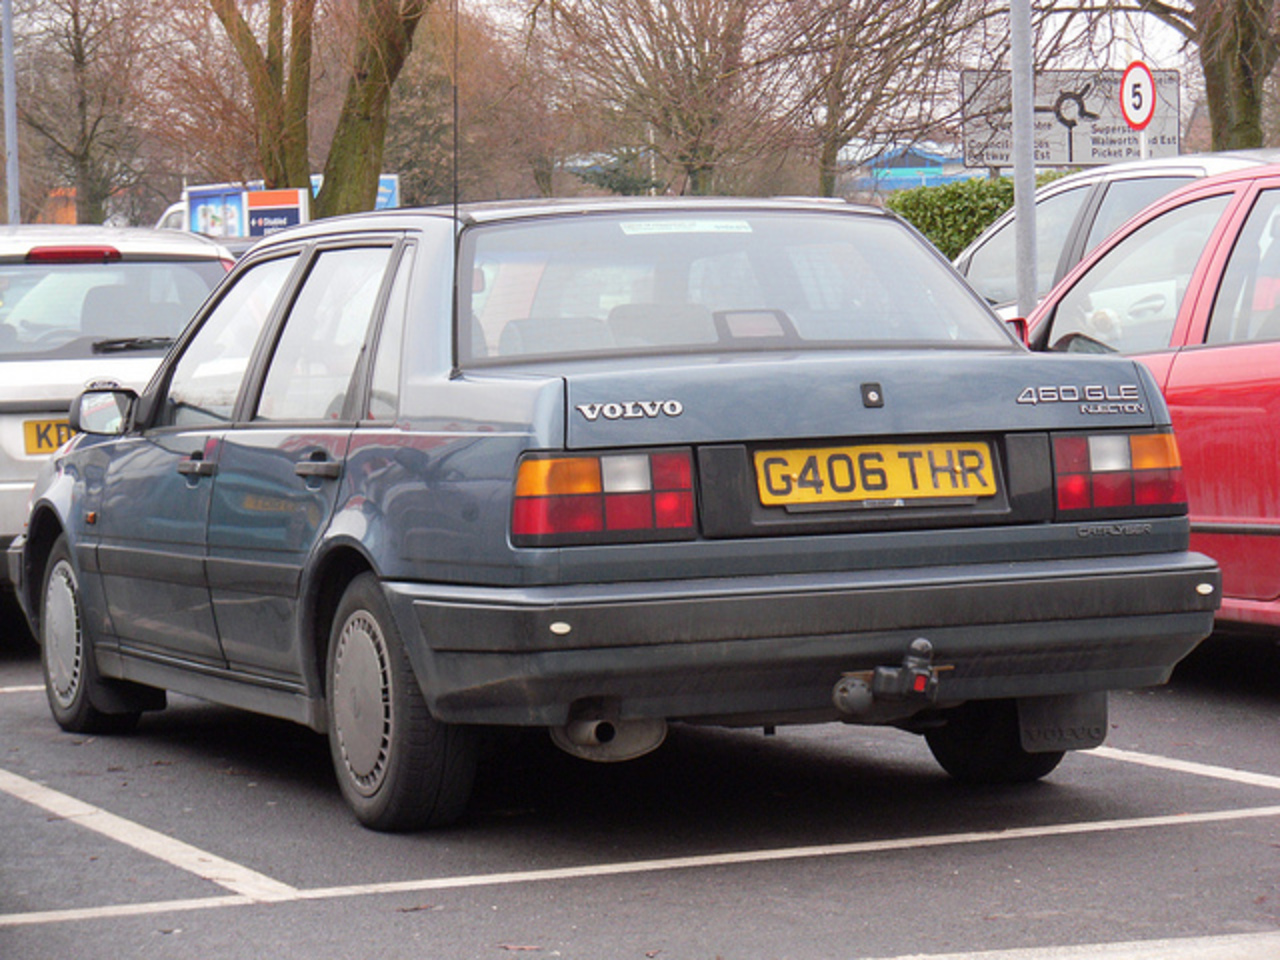 1990 Volvo 460 GLE 1.7 Injection Saloon. | Flickr - Photo Sharing!